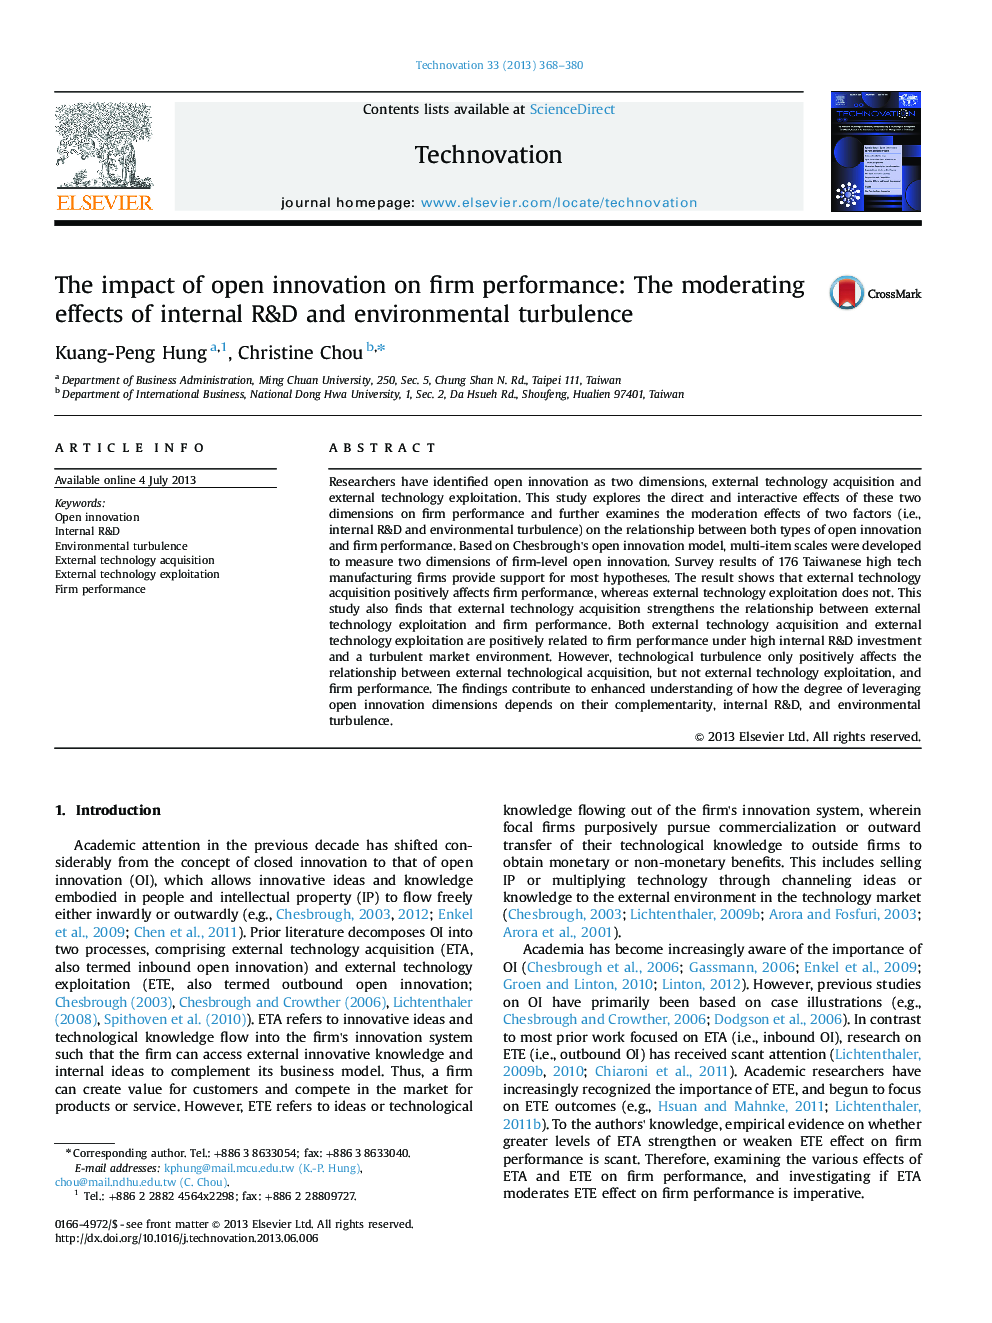 The impact of open innovation on firm performance: The moderating effects of internal R&D and environmental turbulence